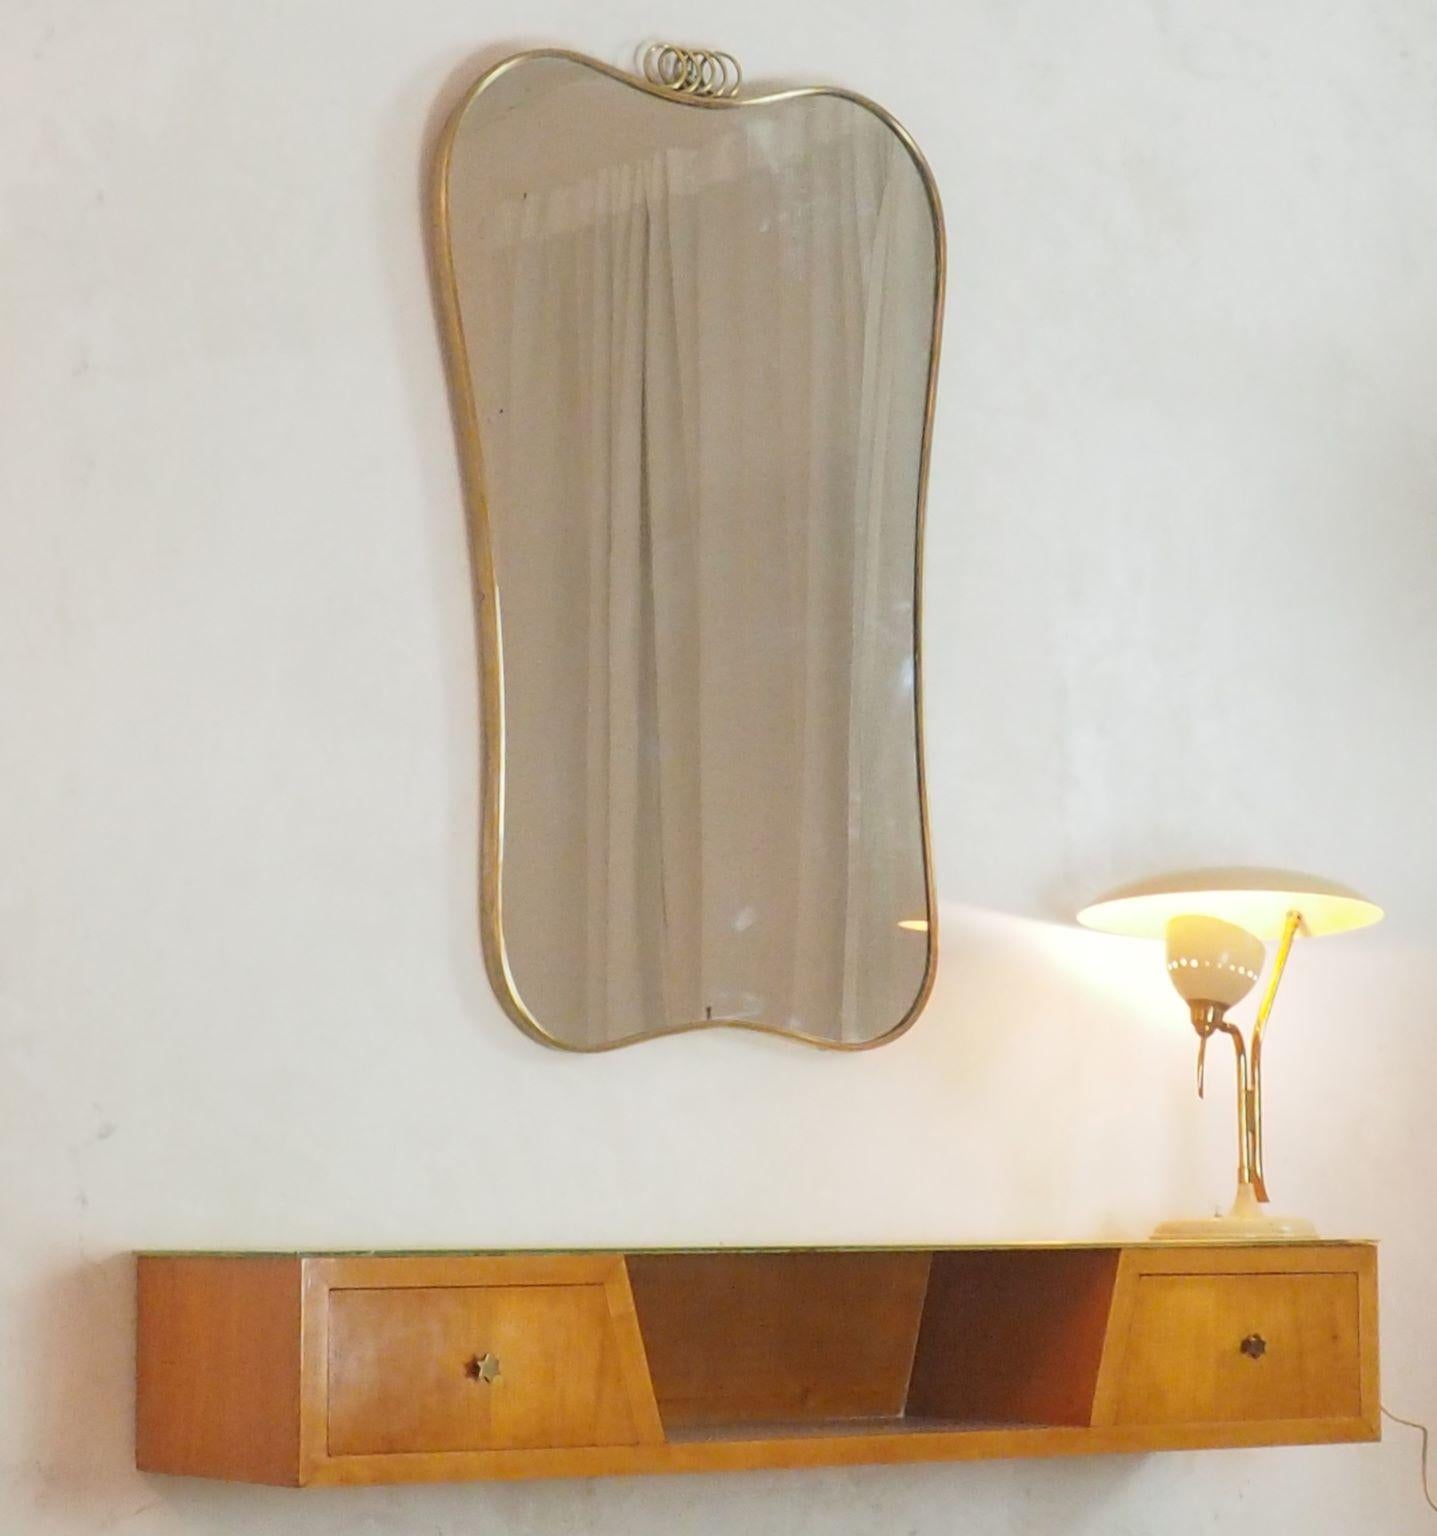 Italian large wall mirror, with curved brass frame and bevelled original mirror.
General good condition with original patina of the brass.
High quality of the thick brass frame.
Very Similar examples were designed by Gio Ponti in 1950s.
  